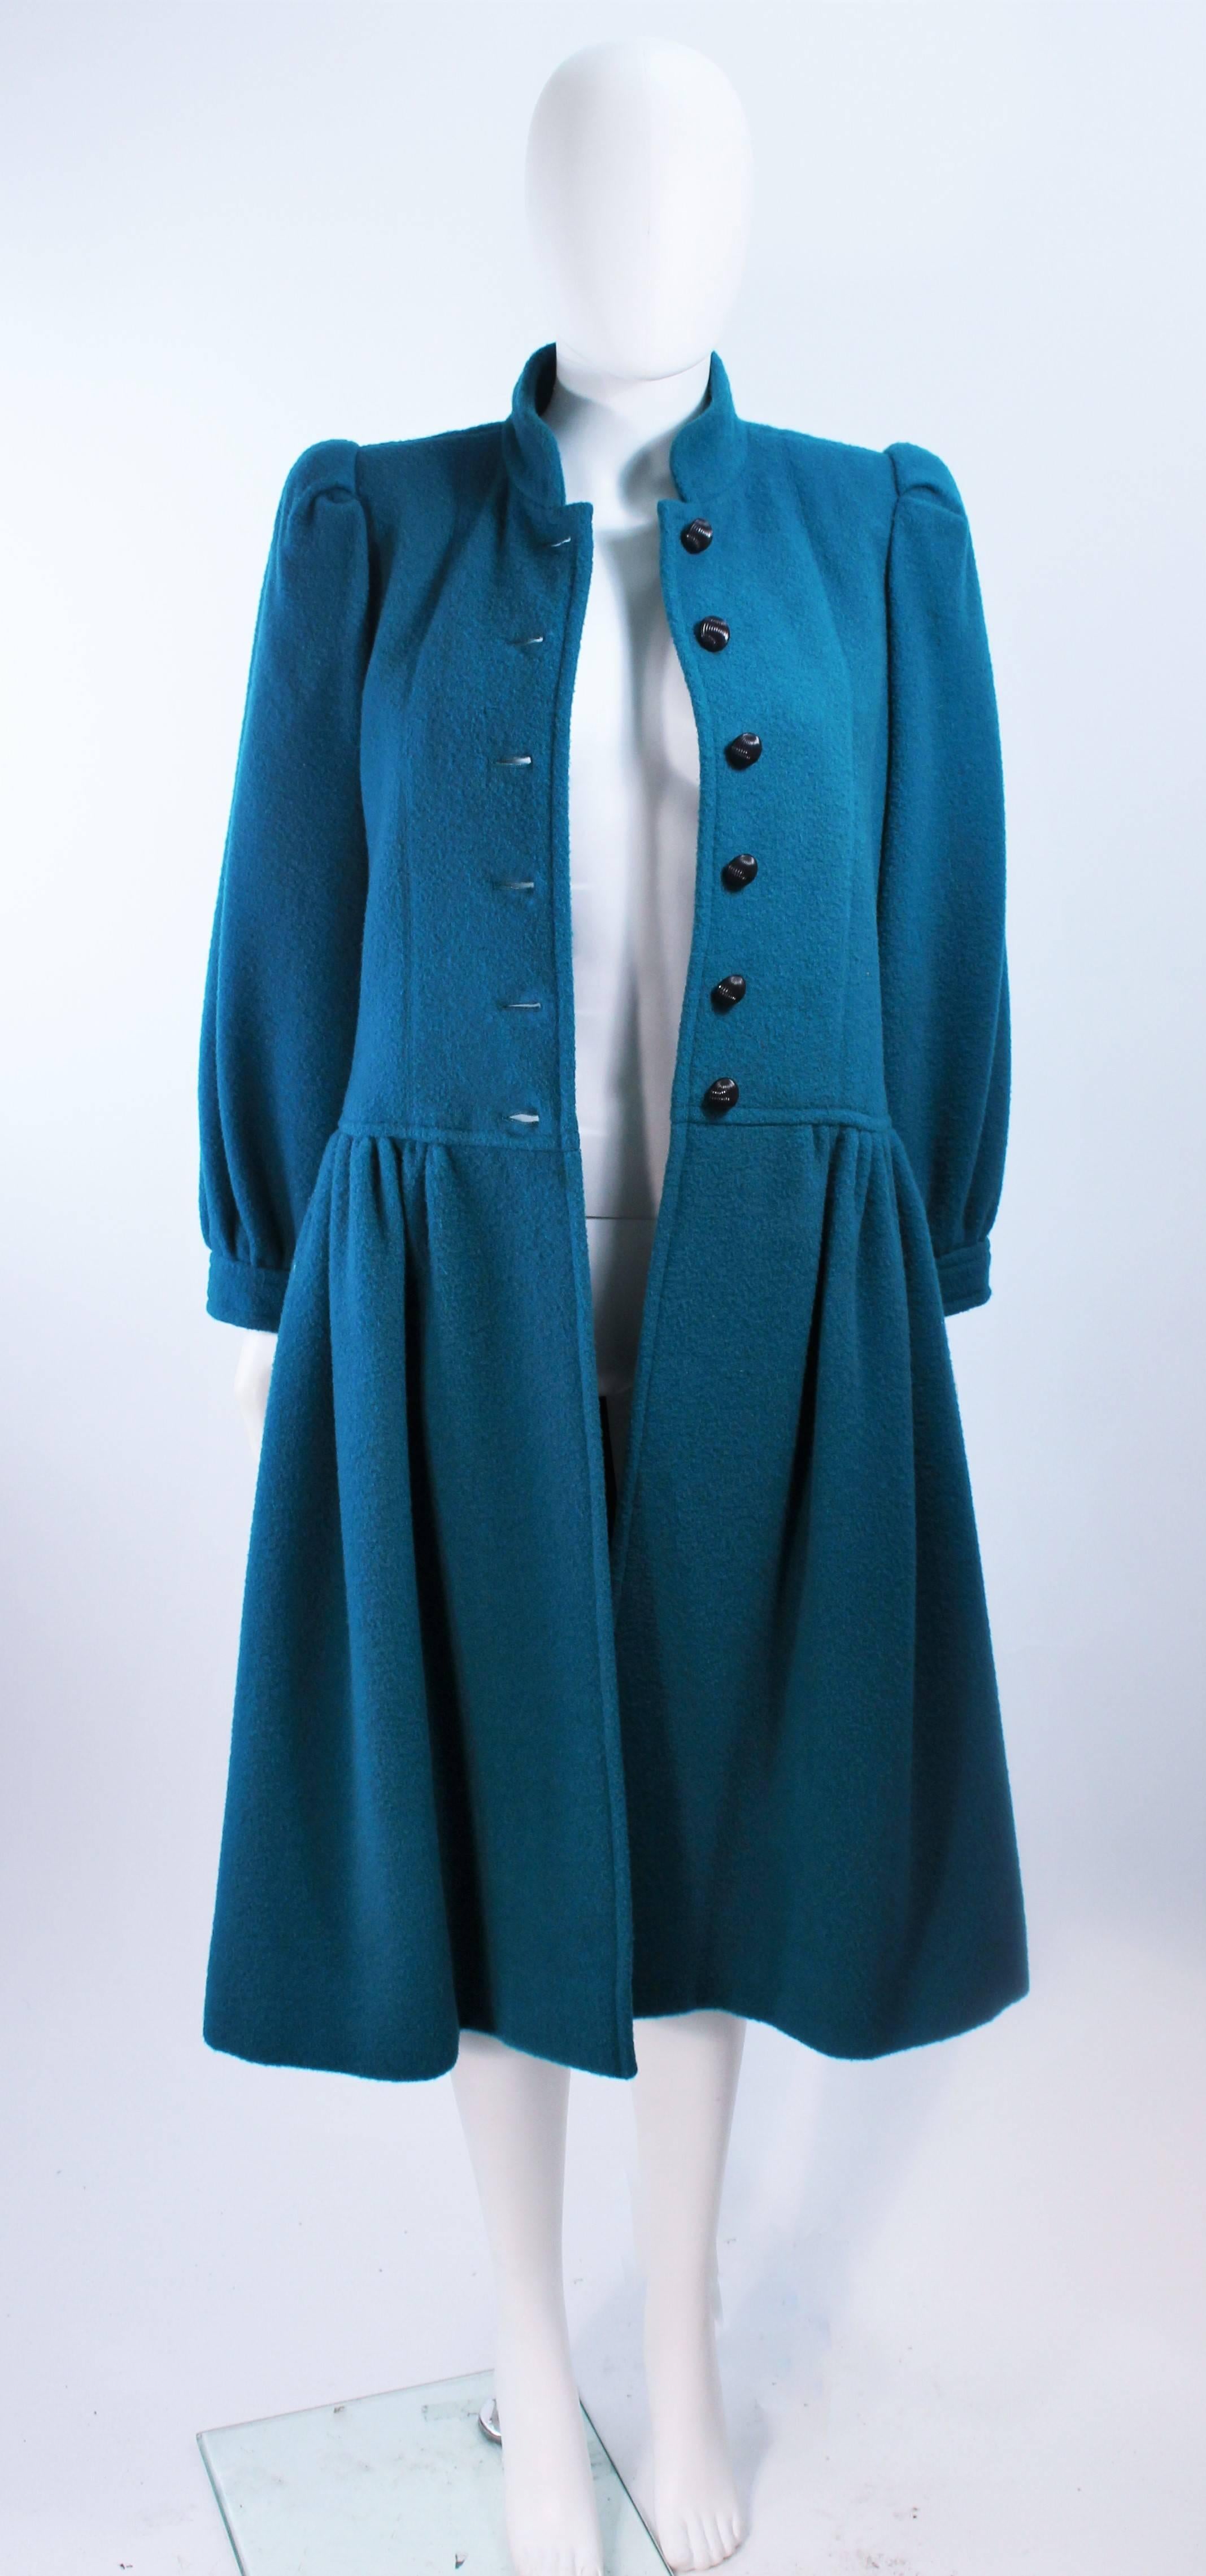 YVES SAINT LAURENT Turquoise Wool Coat Size 6 For Sale 3